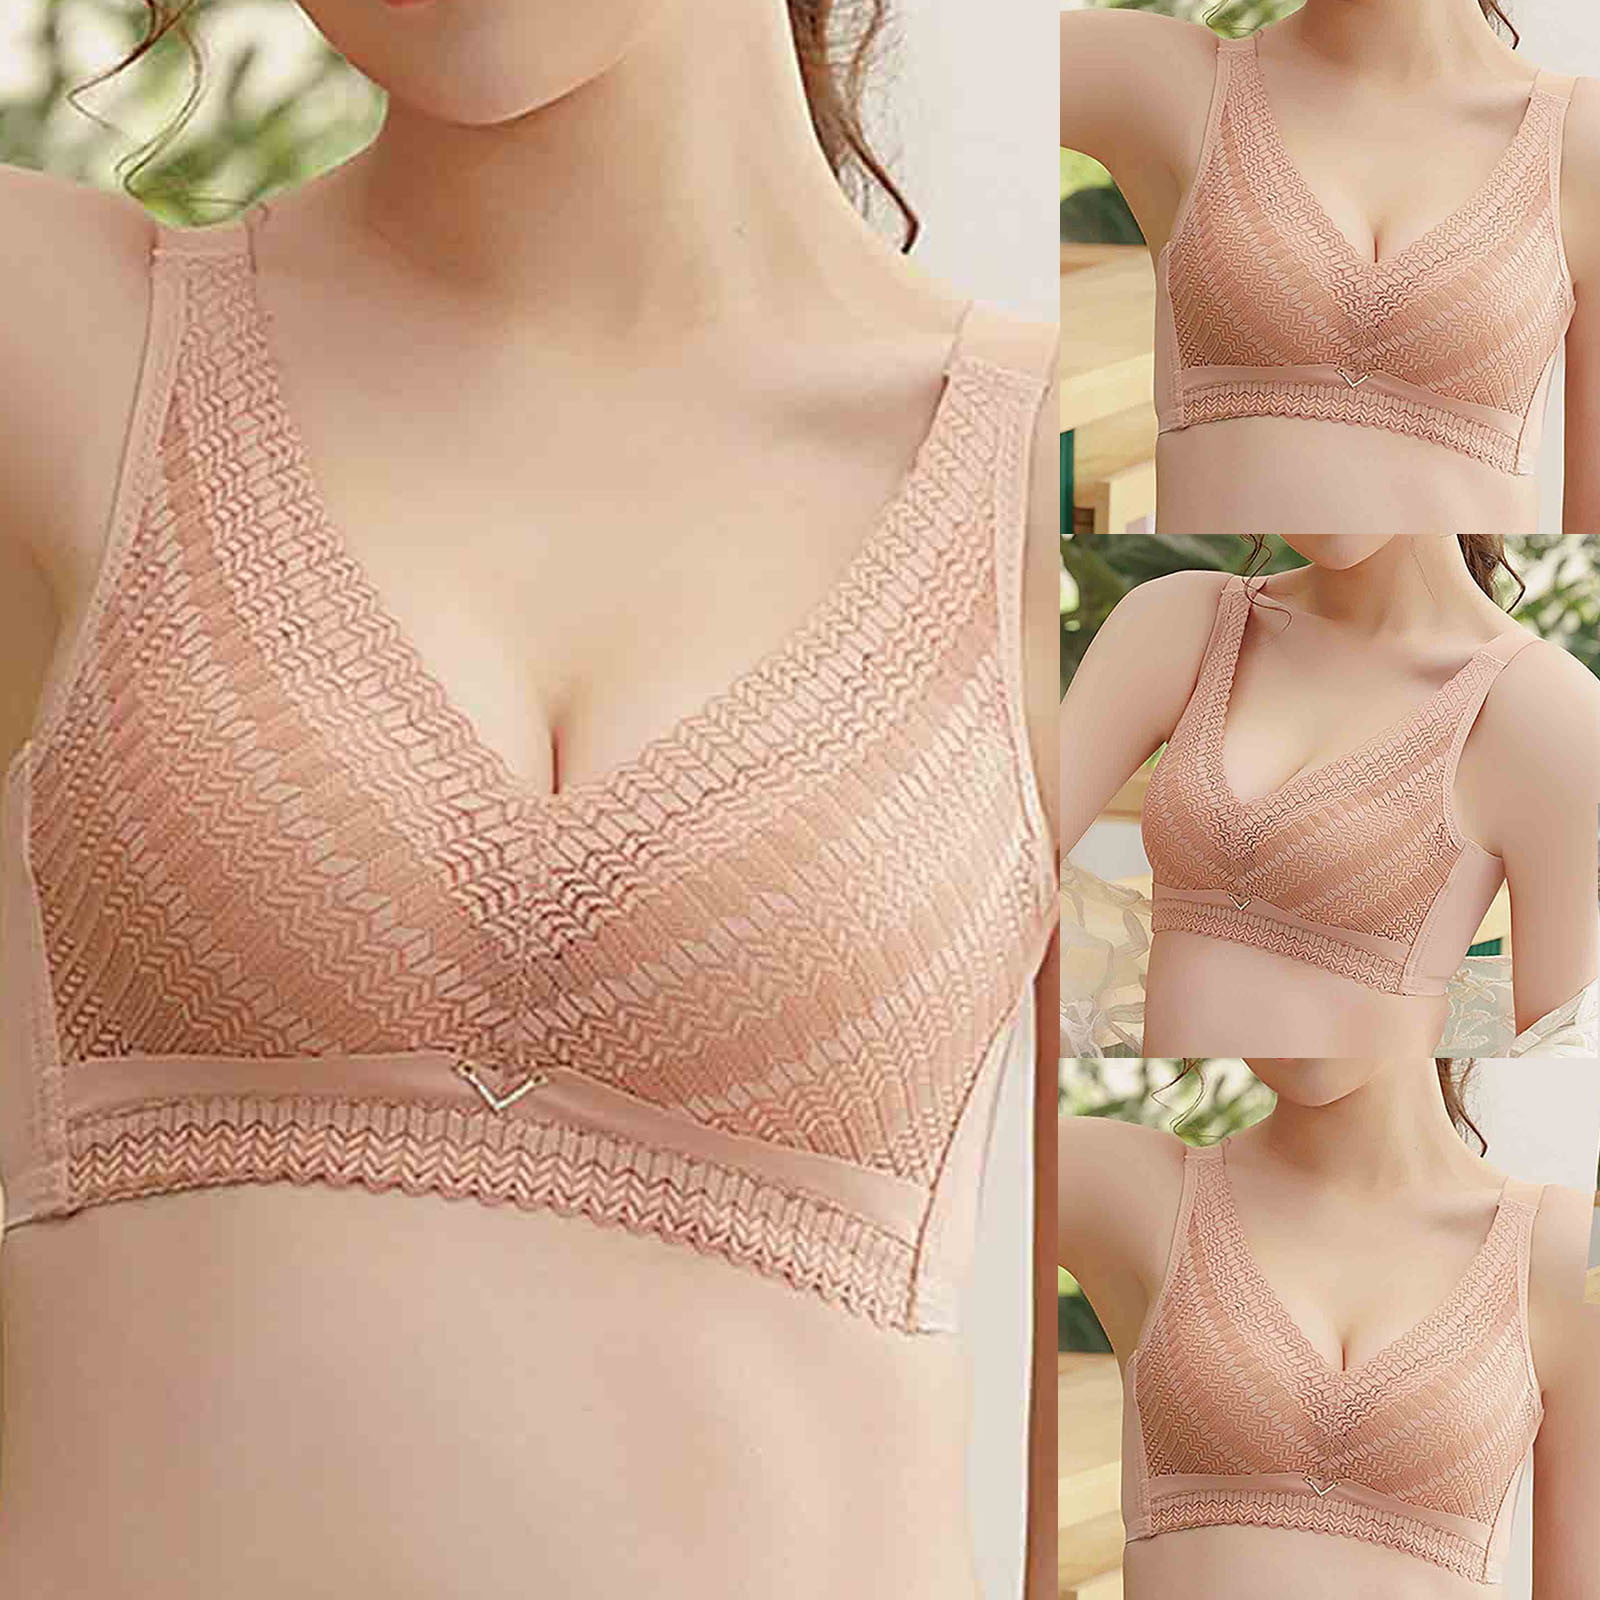 Bras for Women,Clearance Ladies Fashion Comfortable Breathable No